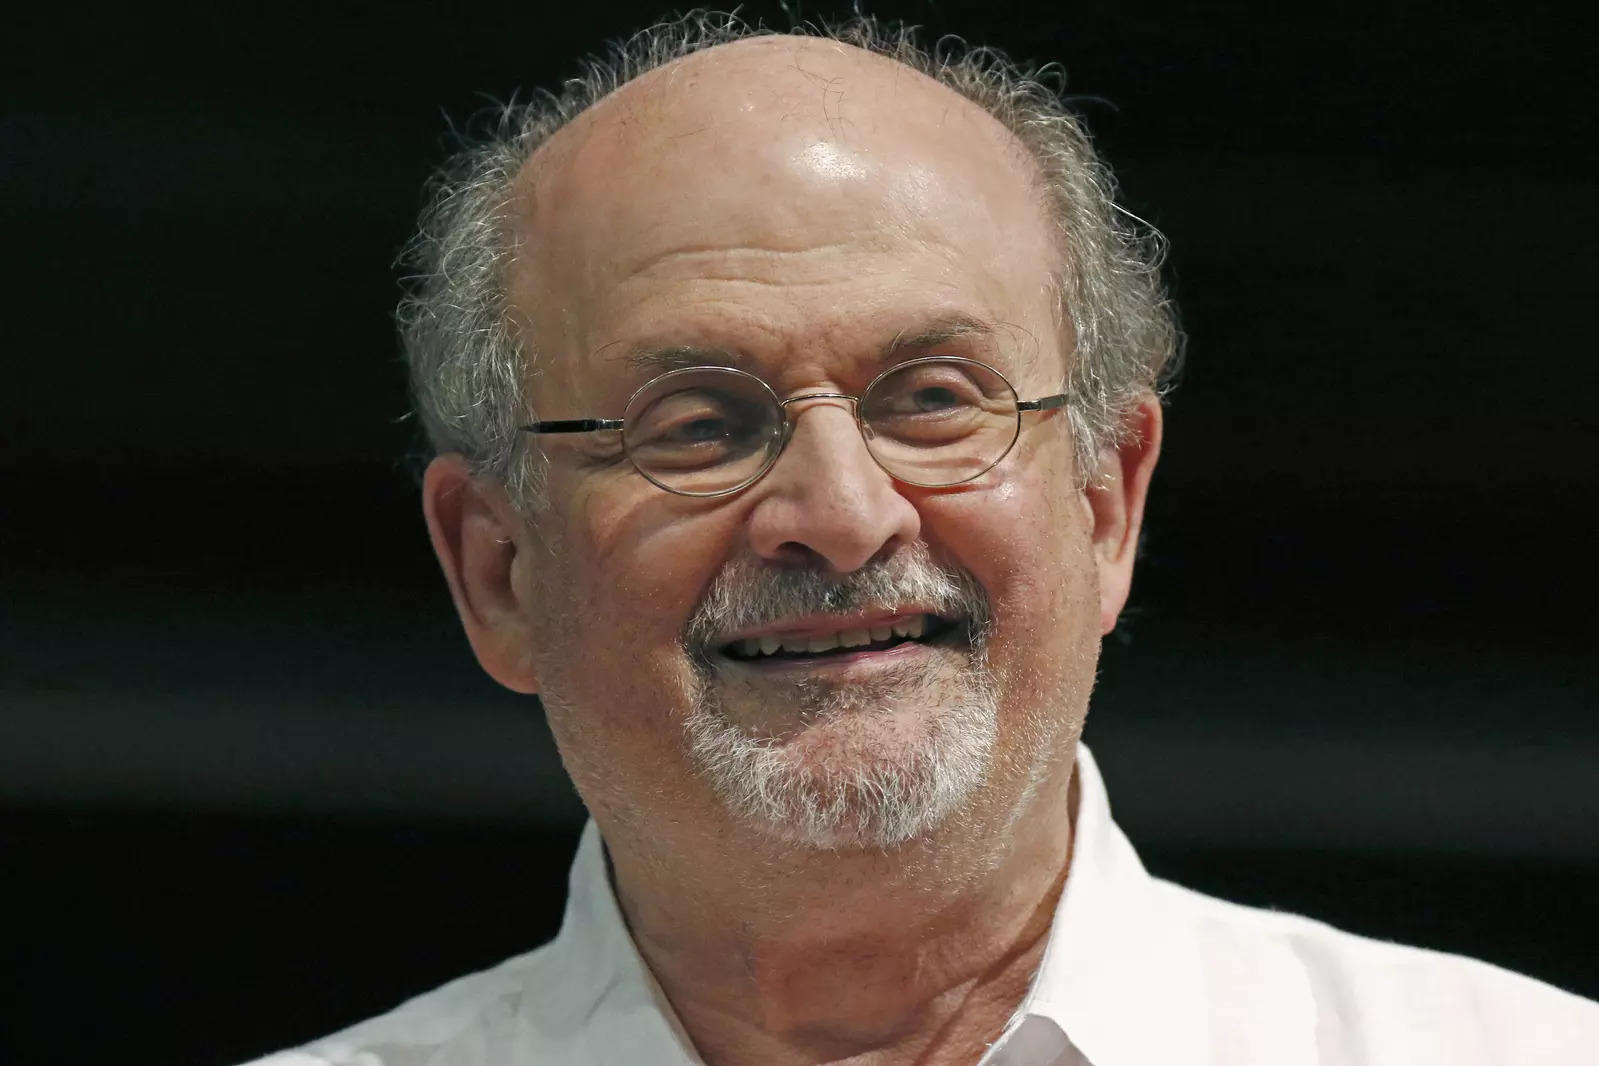 Pictures of renowned author Salman Rushdie who was attacked on the lecture stage in New York